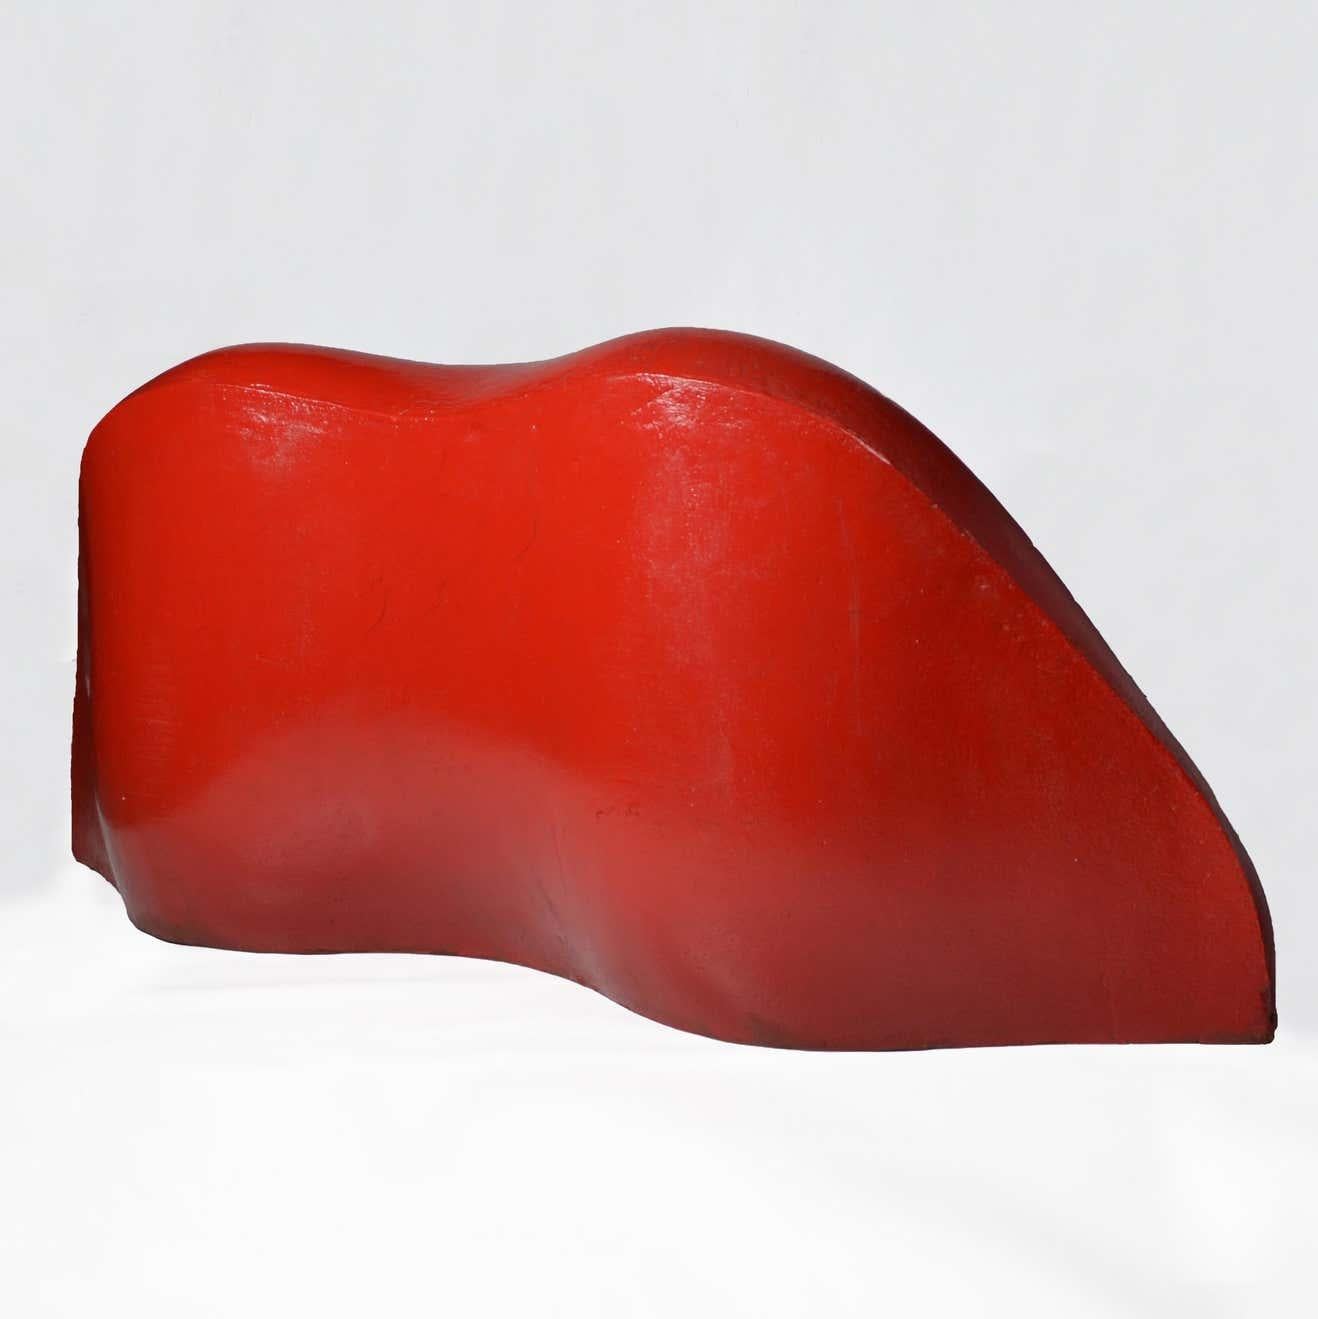 lip couch